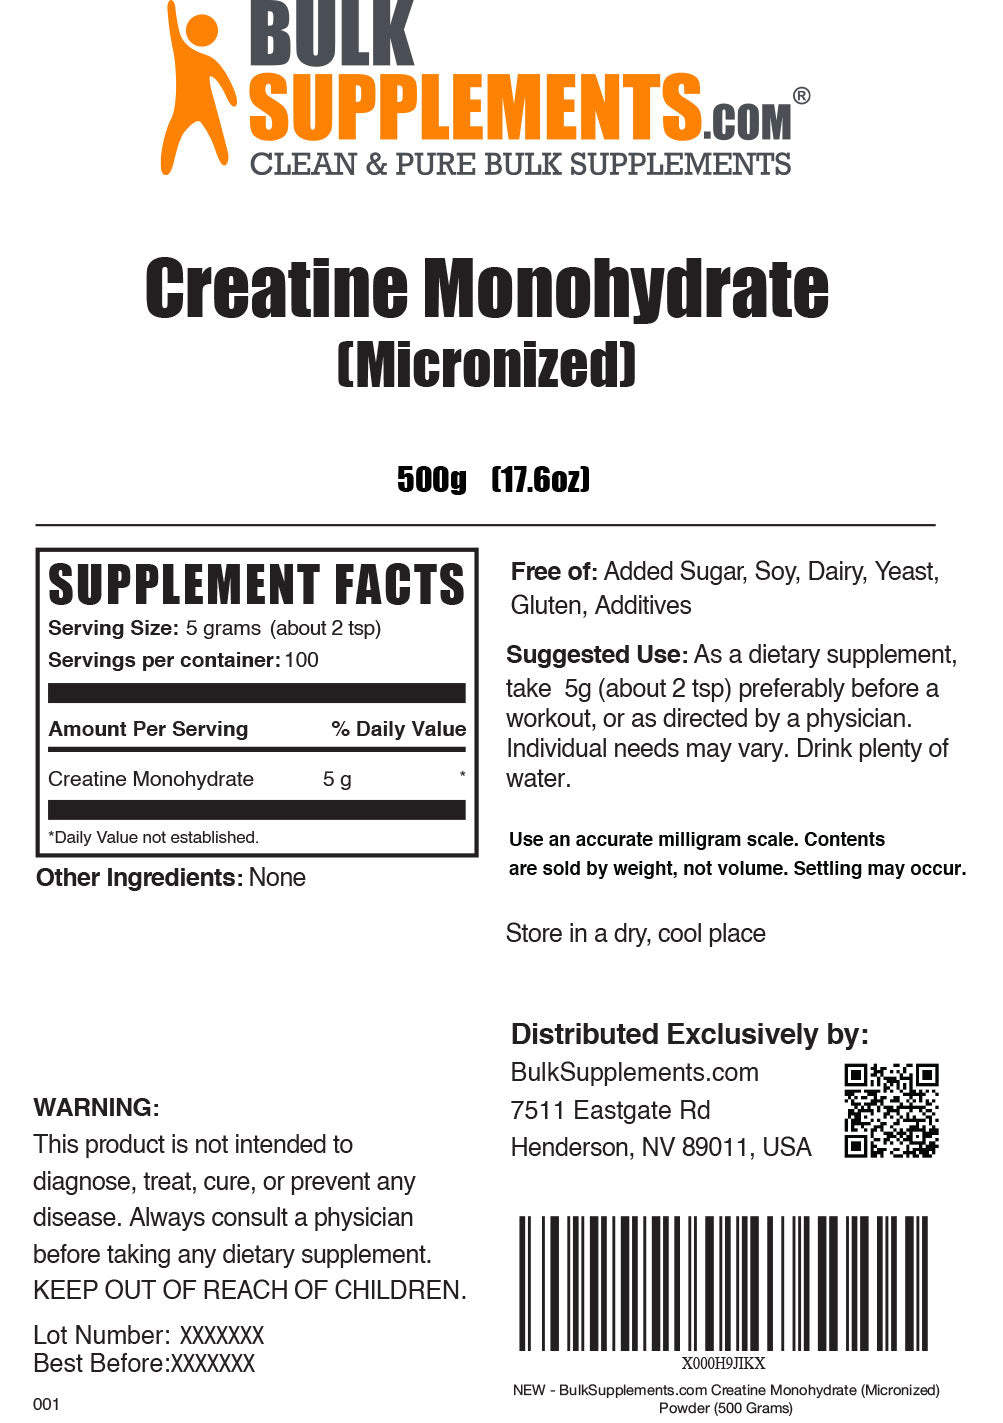 Creatine Monohydrate Supplement Facts and Serving Size for 500g bag